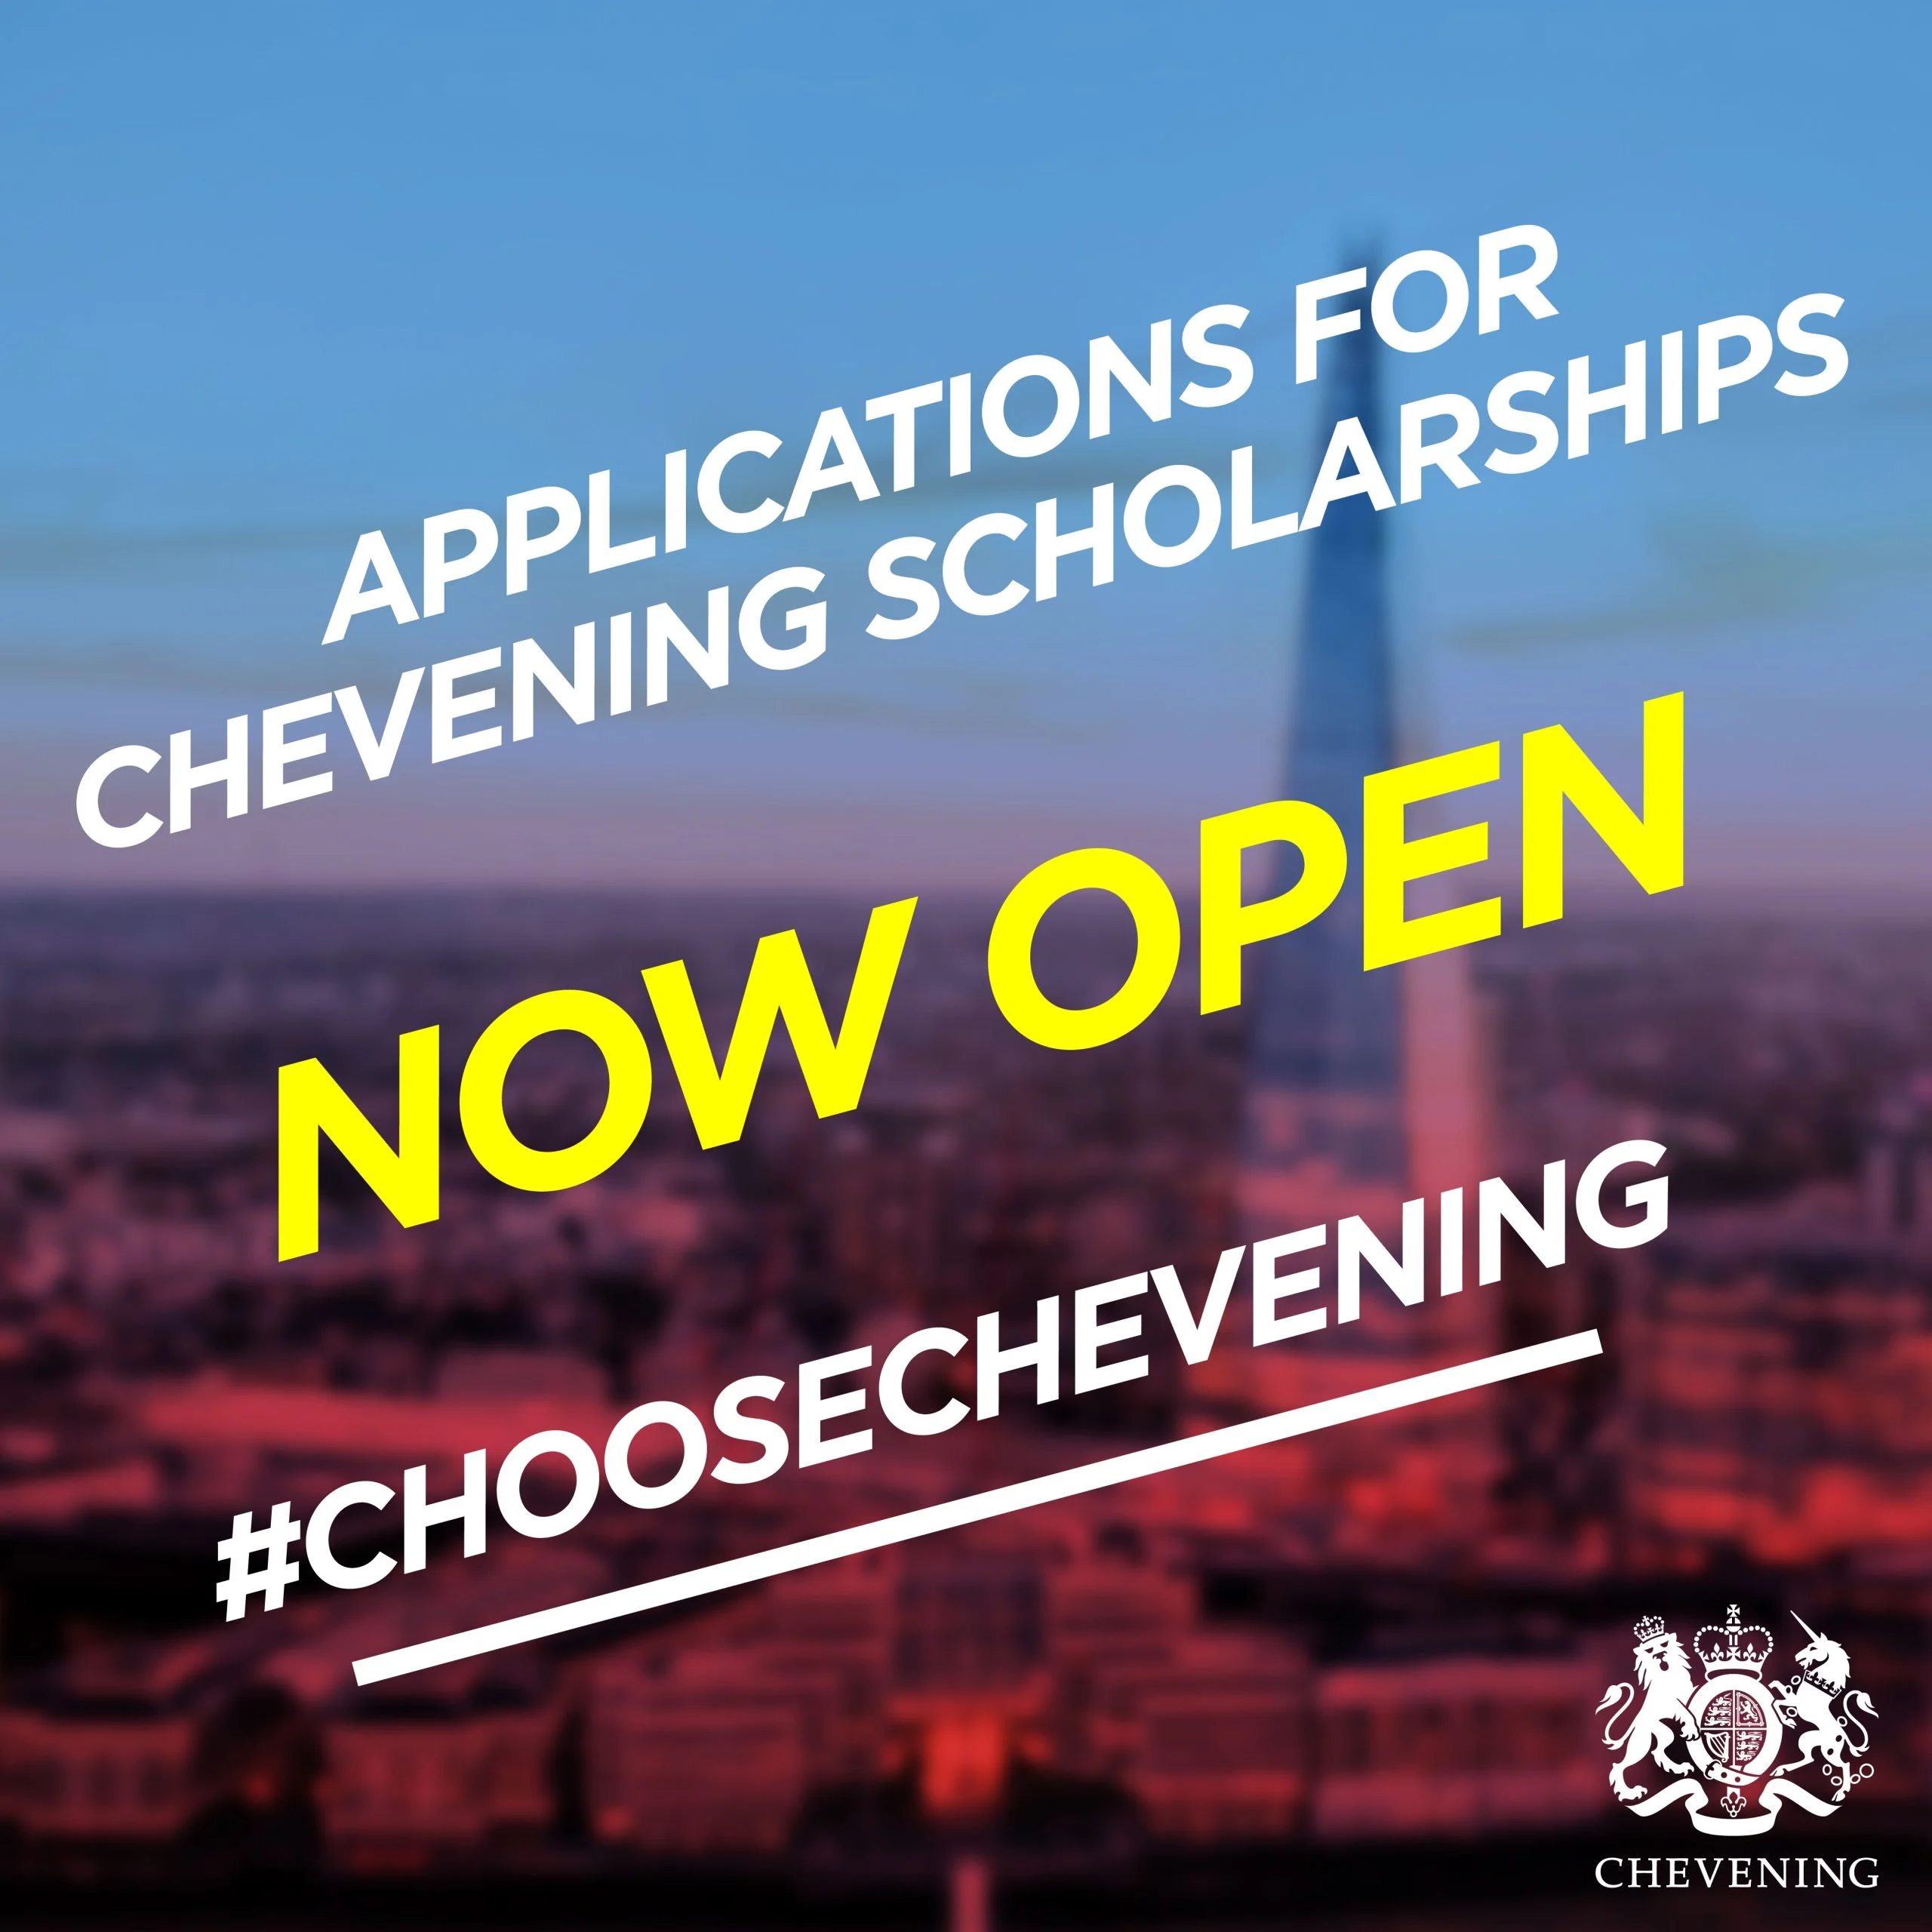 networking essay for chevening scholarship sample